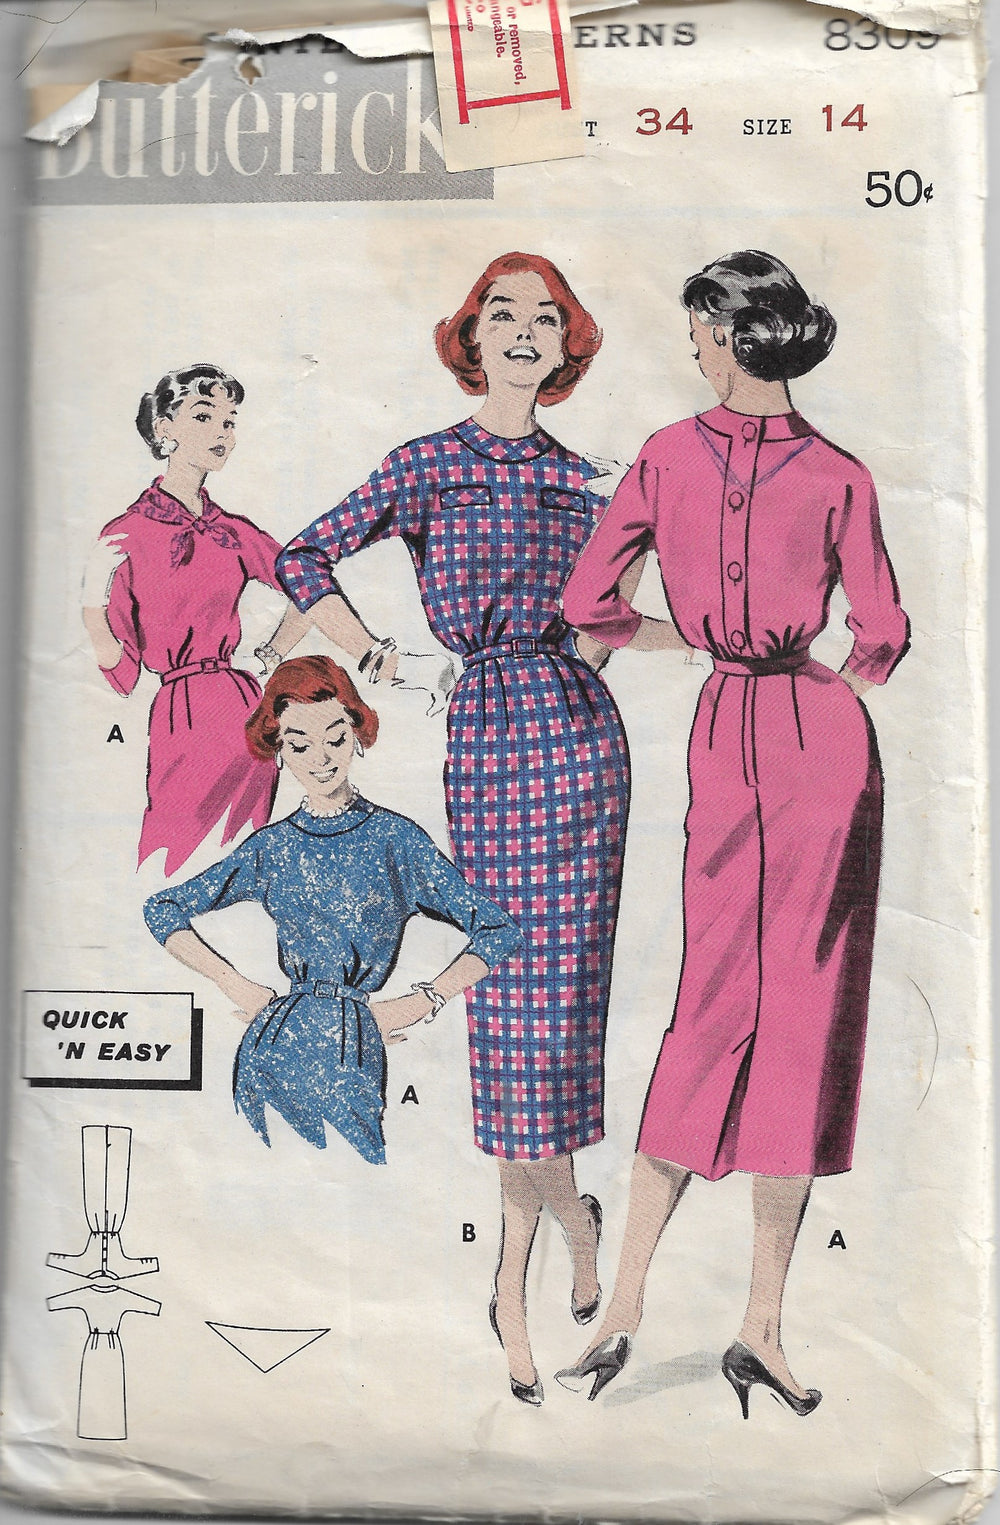 Butterick 8309 Ladies Basic Back Buttoned Sheath Dress Vintage Sewing Pattern 1950s